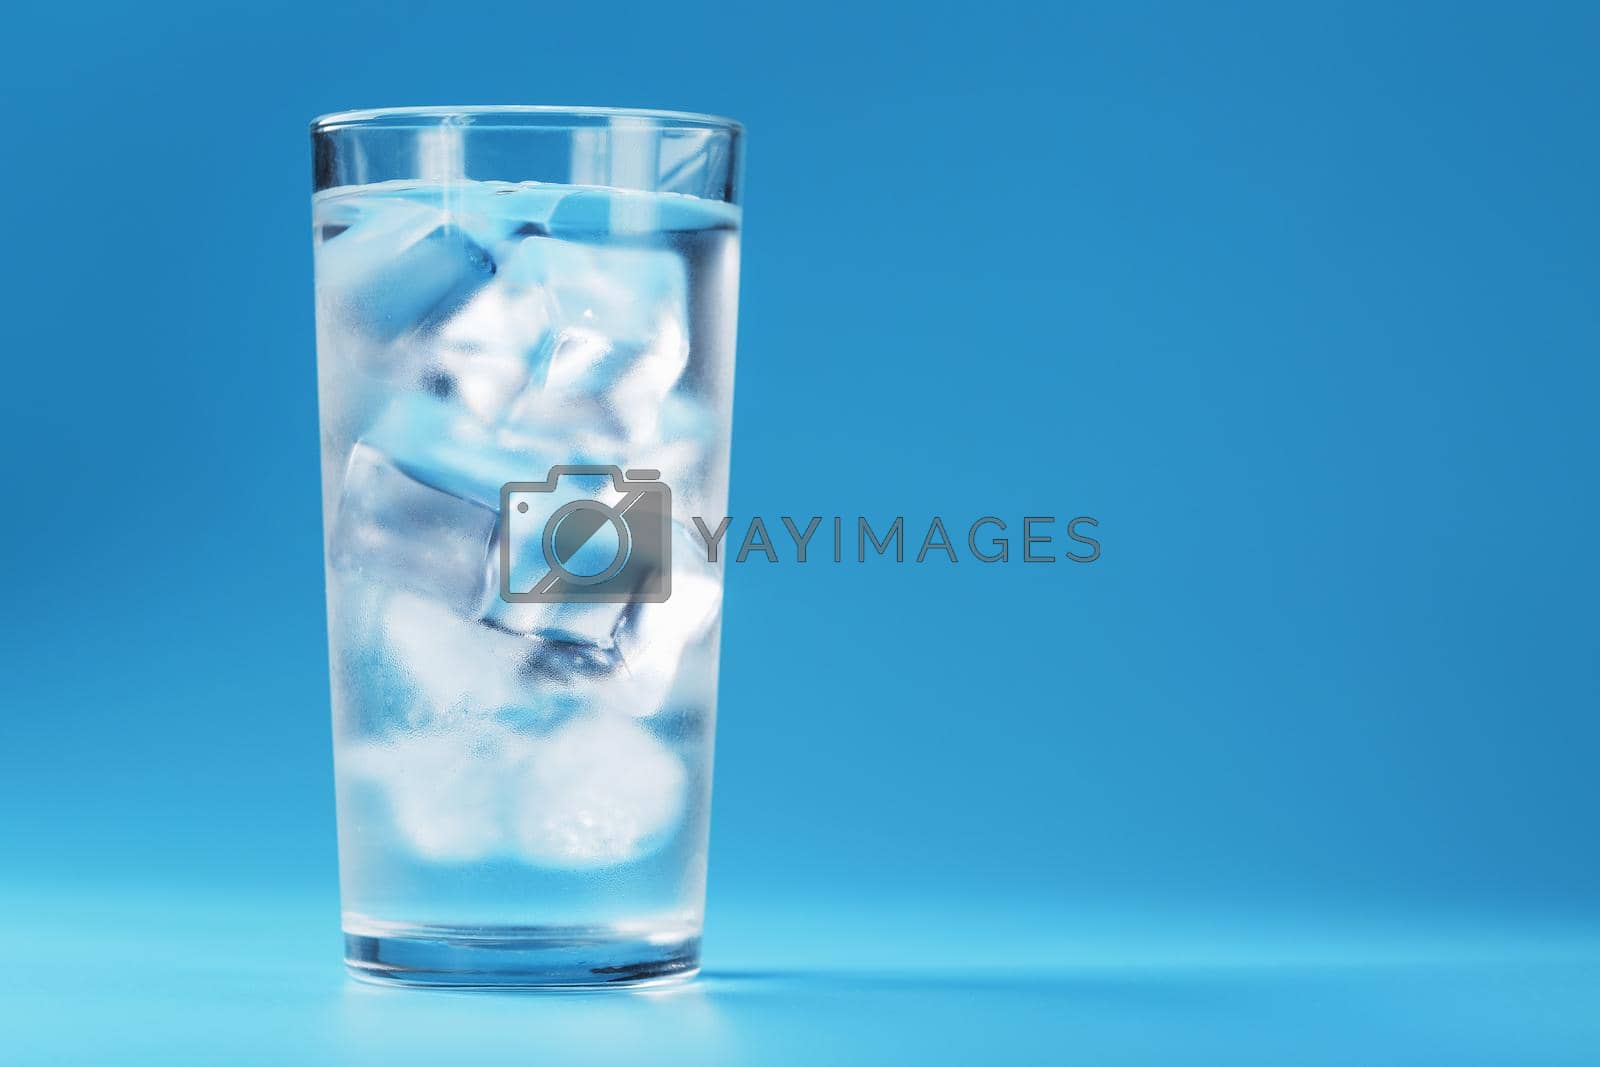 Royalty free image of Glass with water and ice cubes on a blue background by AlexGrec